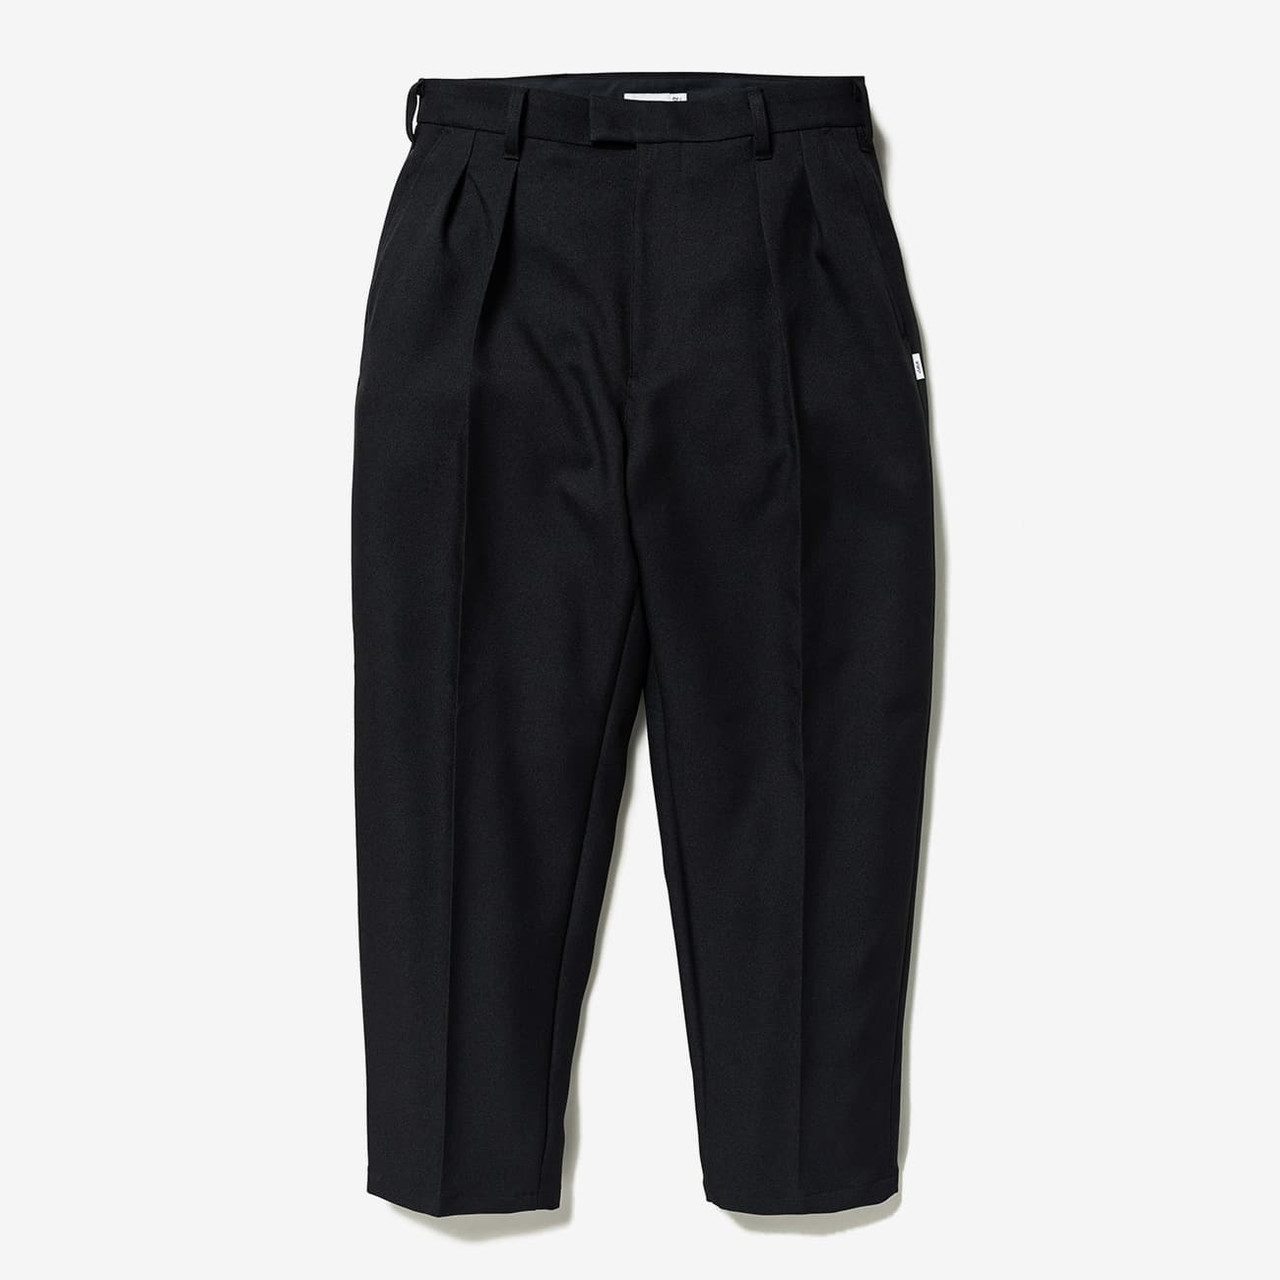 WTAPS 2023AW TRDT1801 TROUSERS BLACK Mタグ袋お付けします